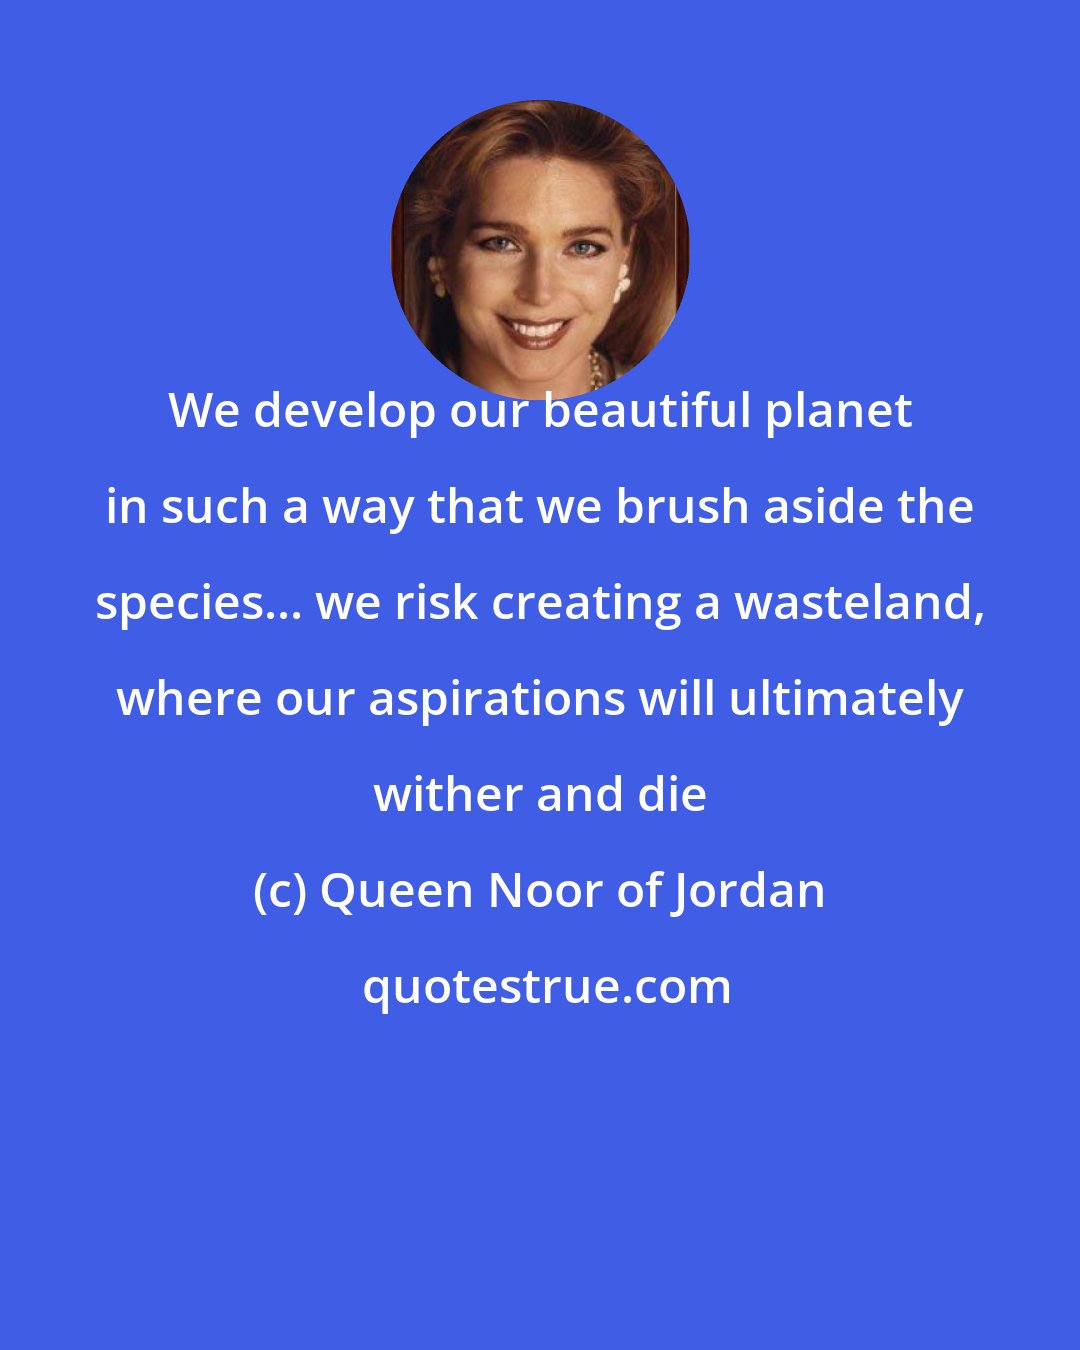 Queen Noor of Jordan: We develop our beautiful planet in such a way that we brush aside the species... we risk creating a wasteland, where our aspirations will ultimately wither and die